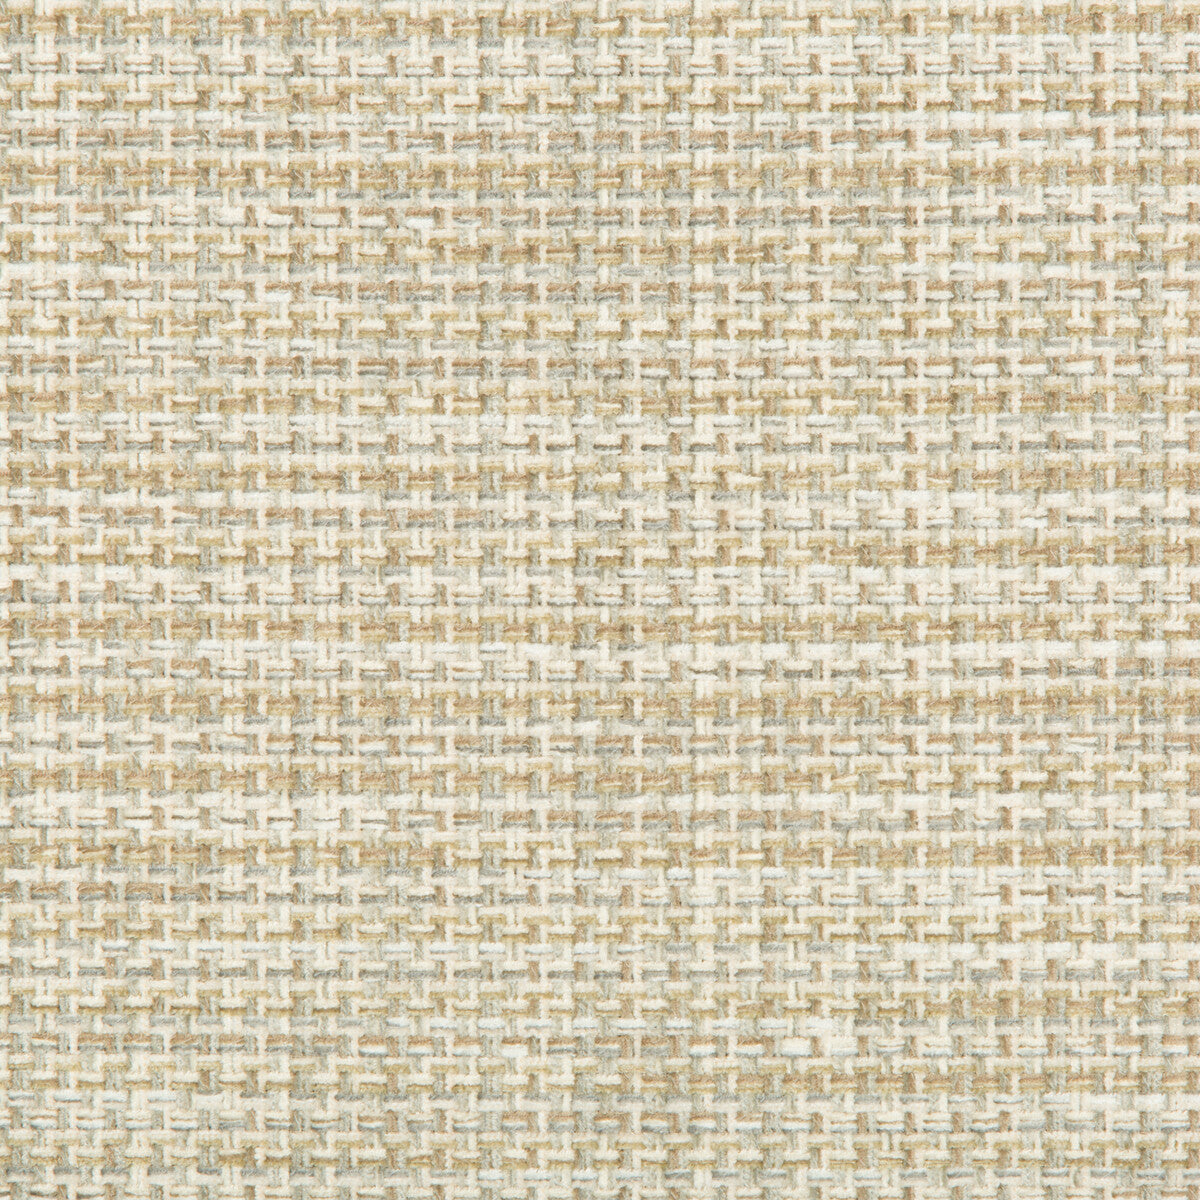 Westhigh fabric in oyster color - pattern 35305.16.0 - by Kravet Basics in the Greenwich collection